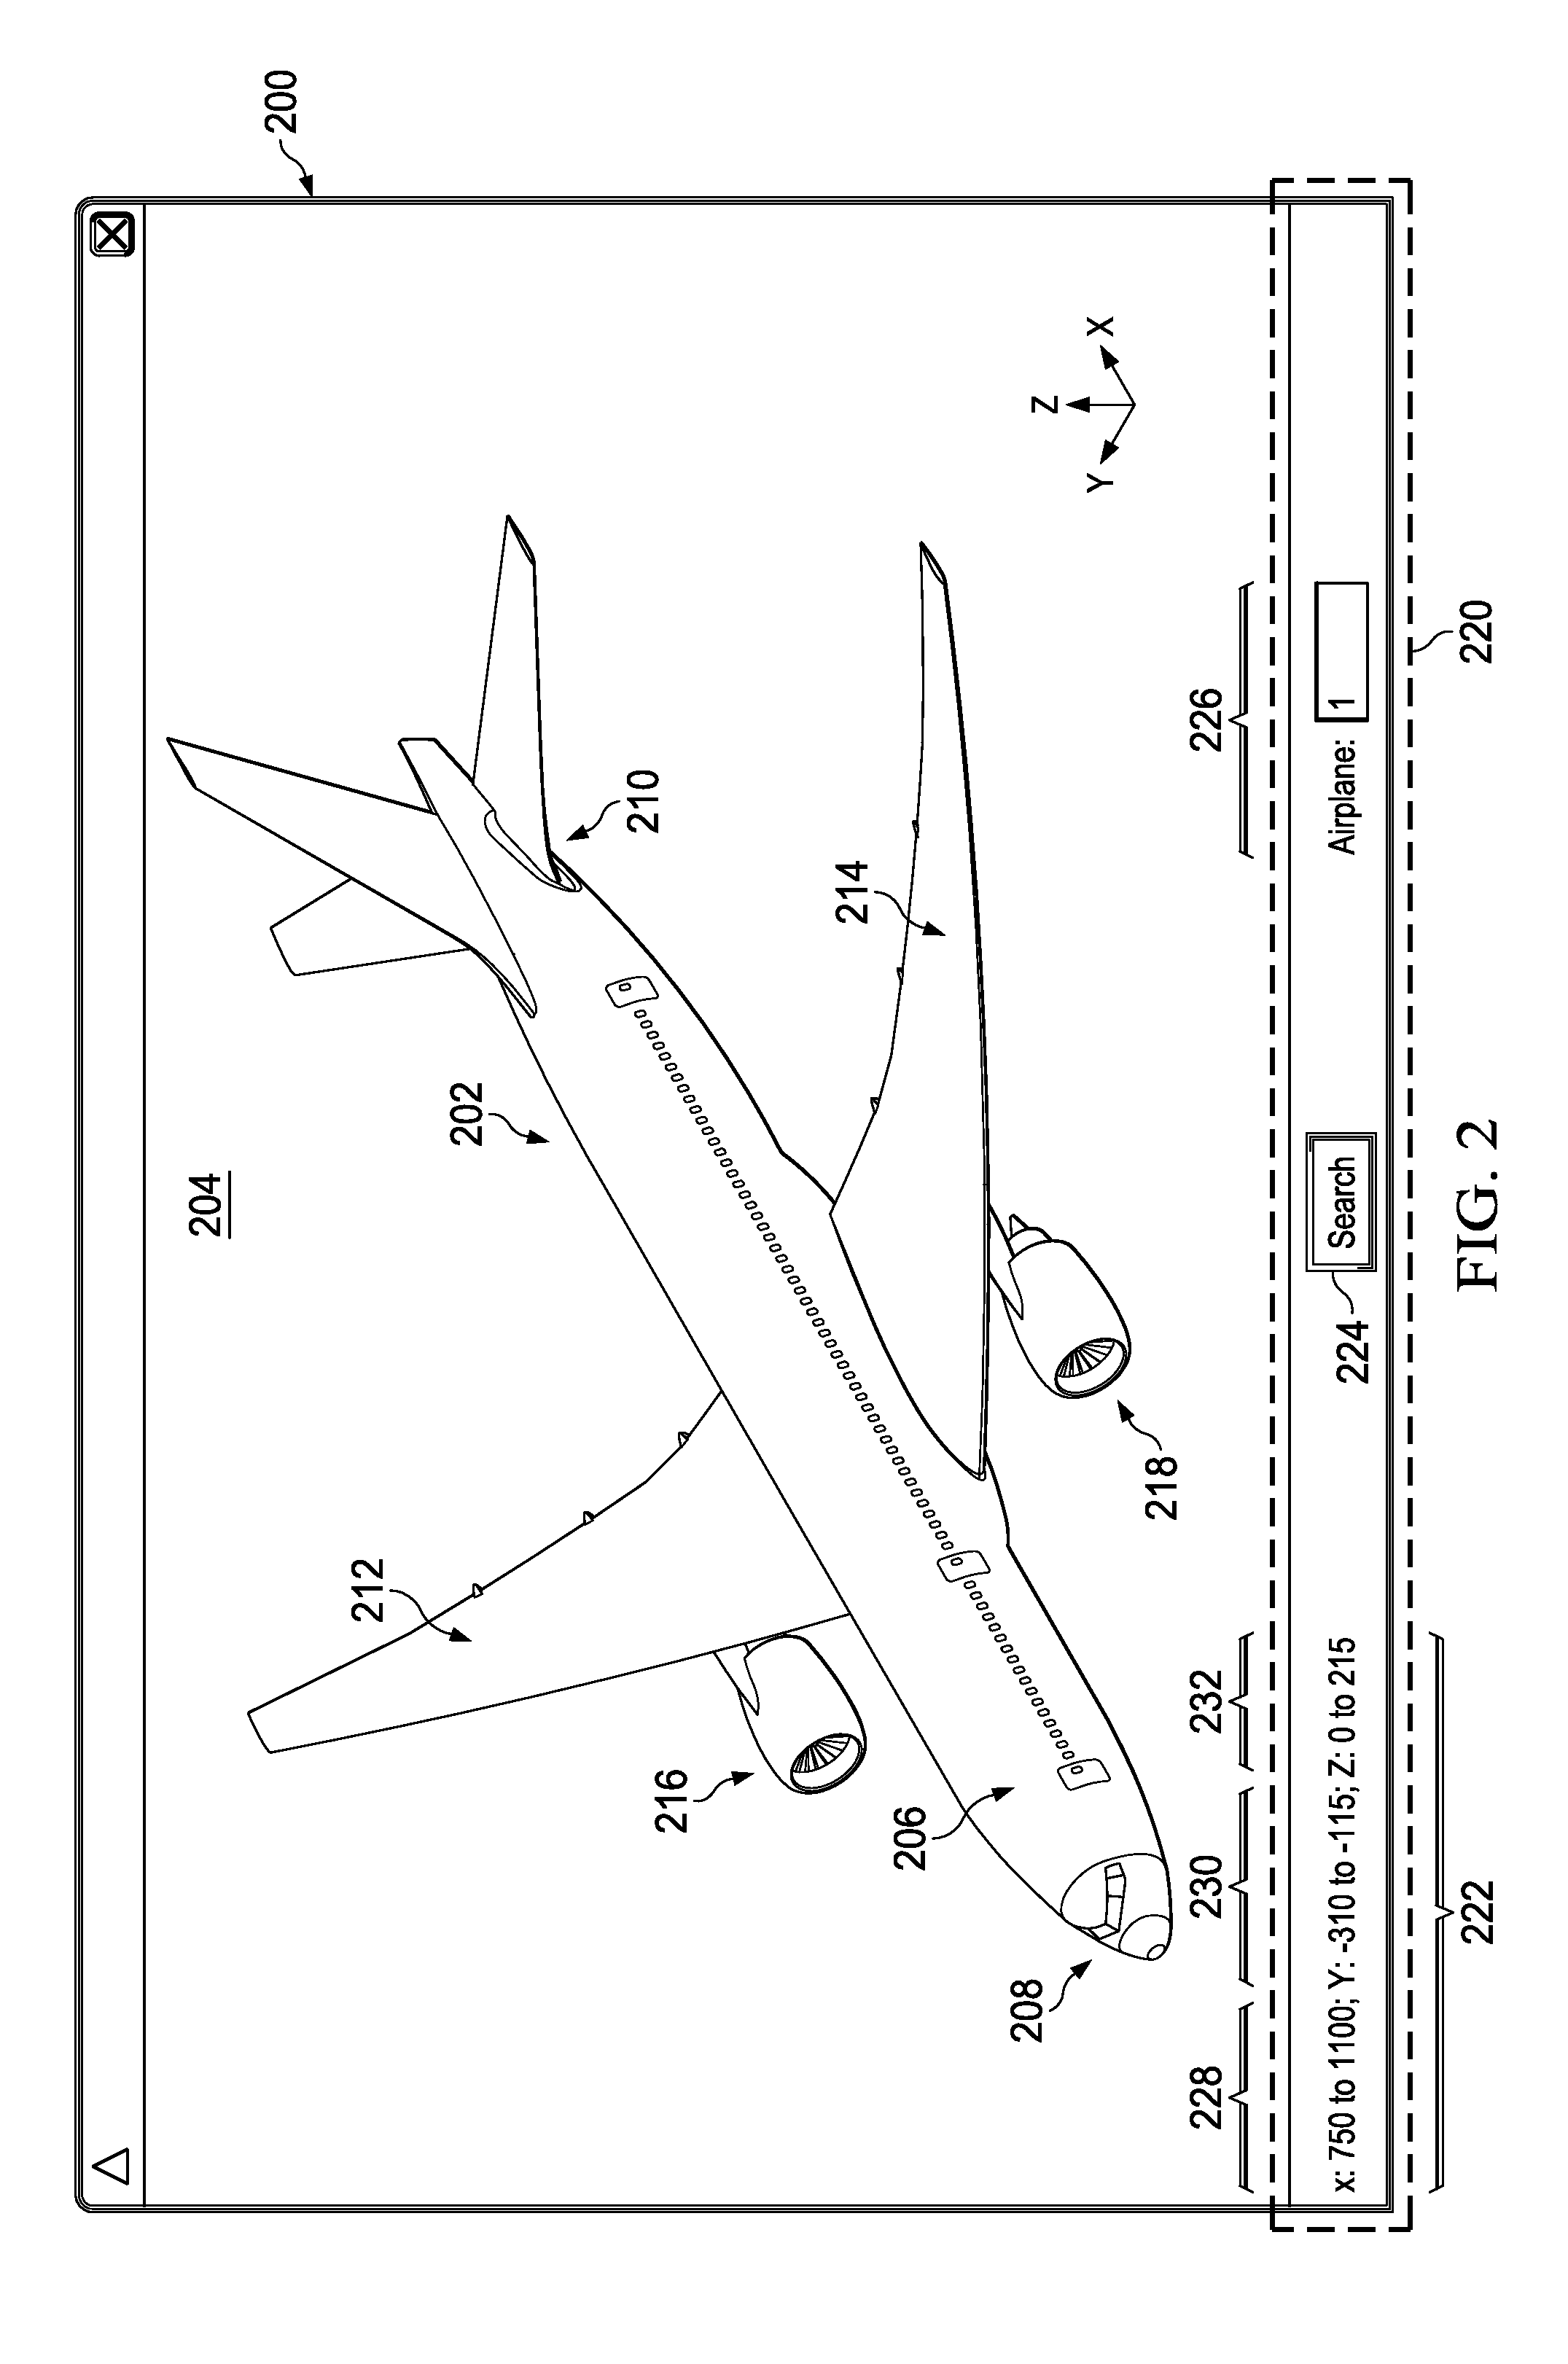 Visualization of an Object Using a Visual Query System